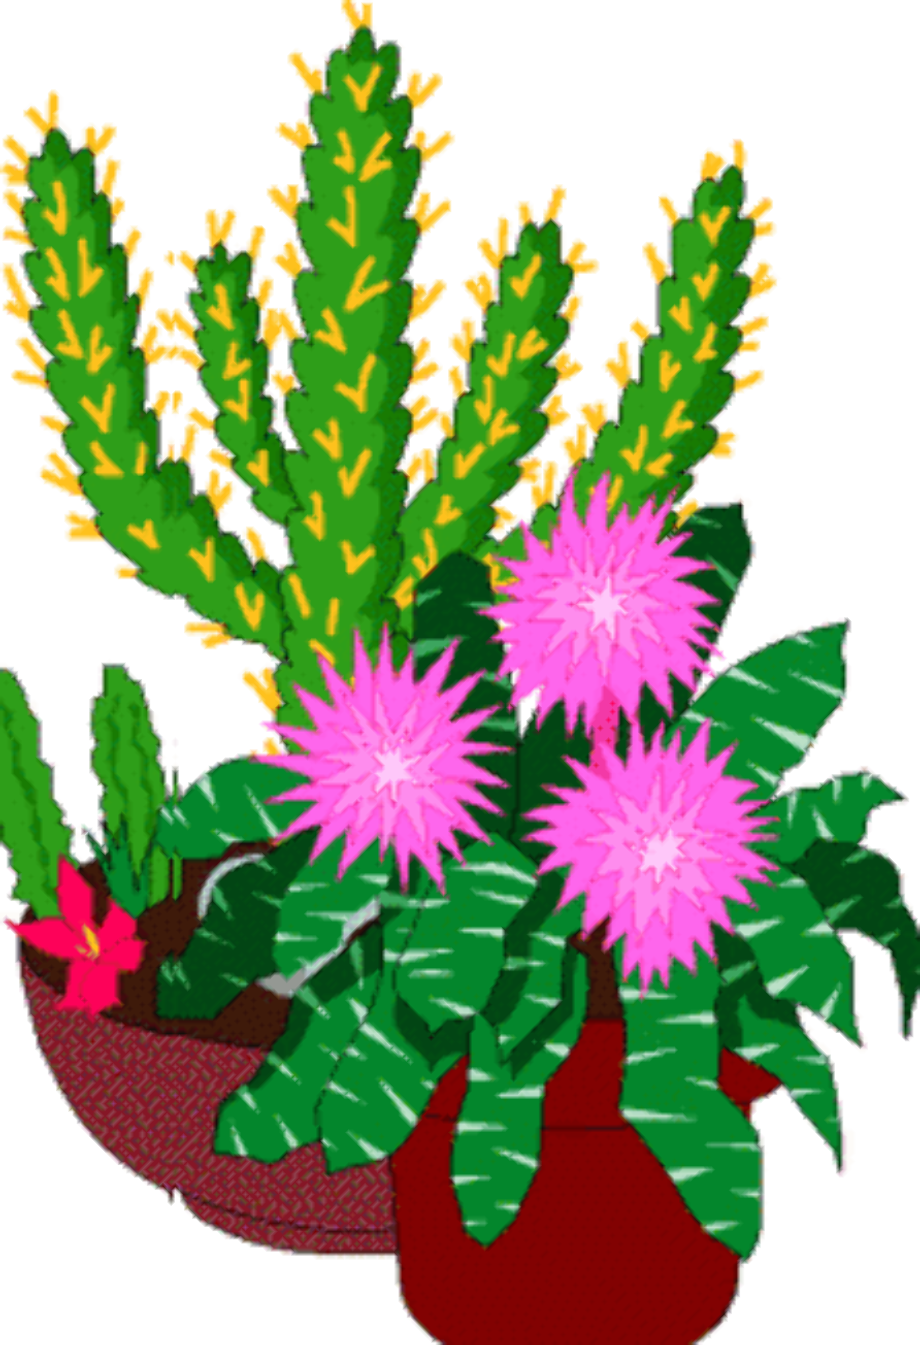 Flower clipart royalty free